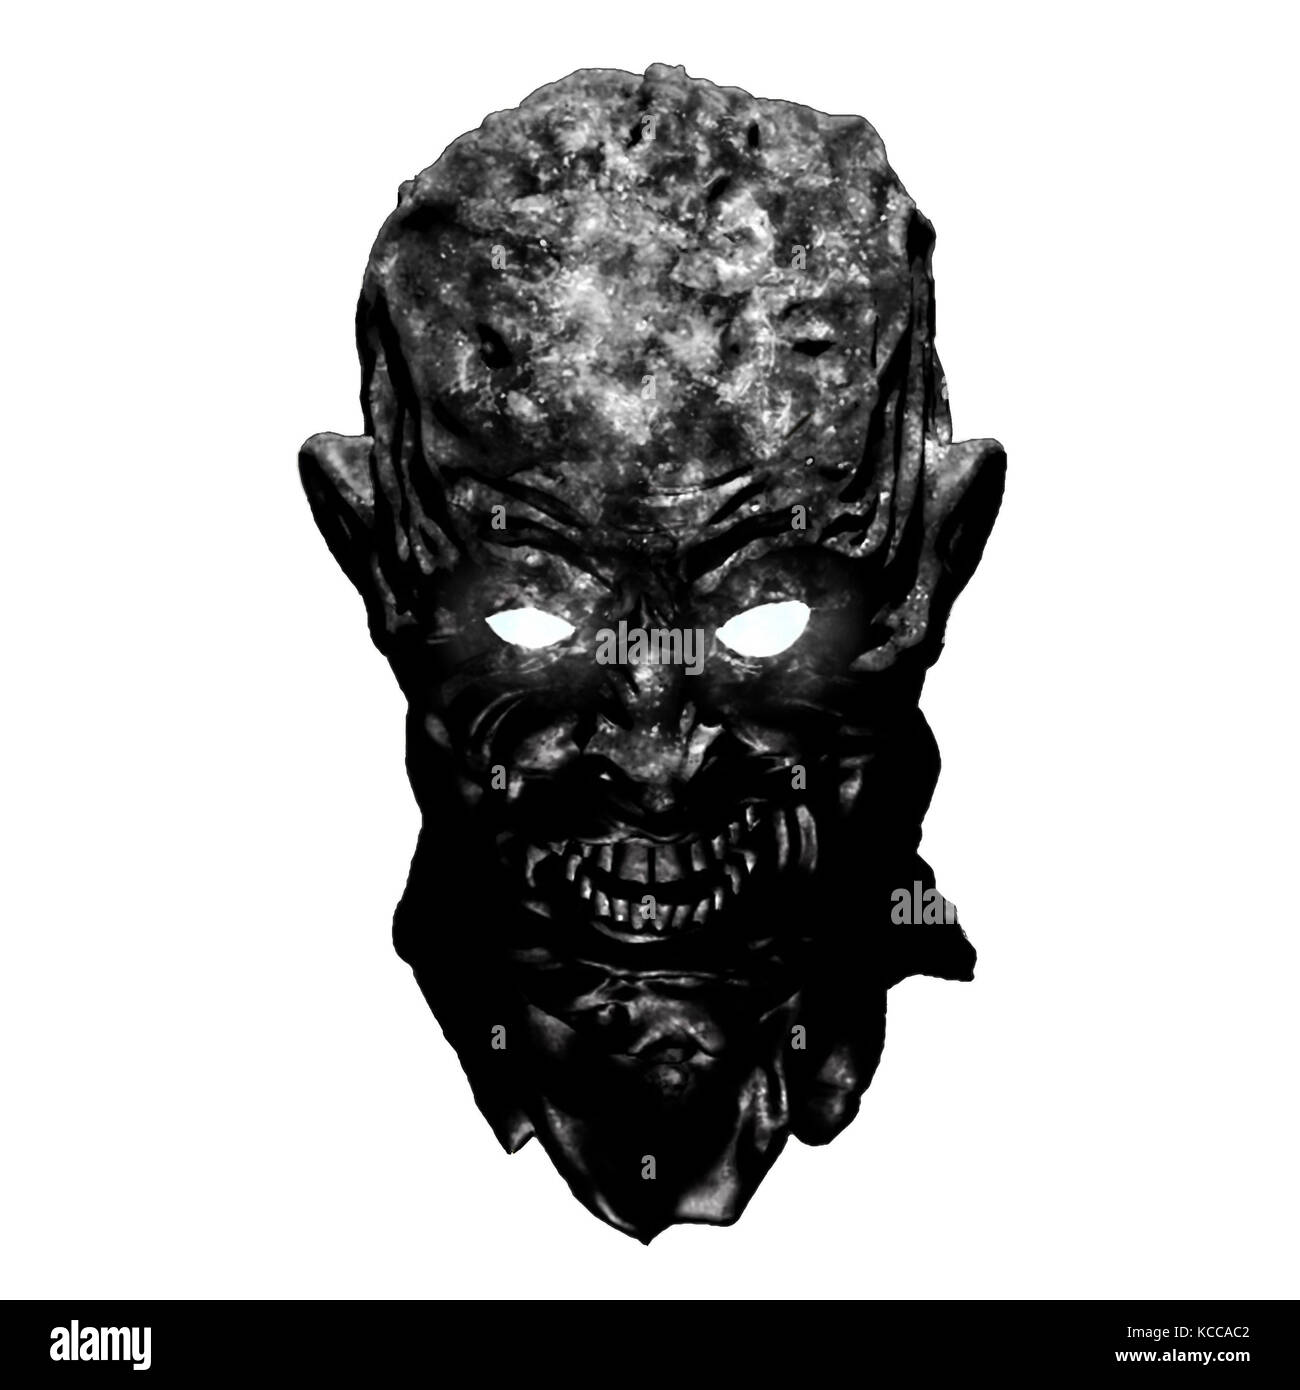 Vampire grim head. 3D illustration in genre of horror. Scary character face in black and white color. Stock Photo